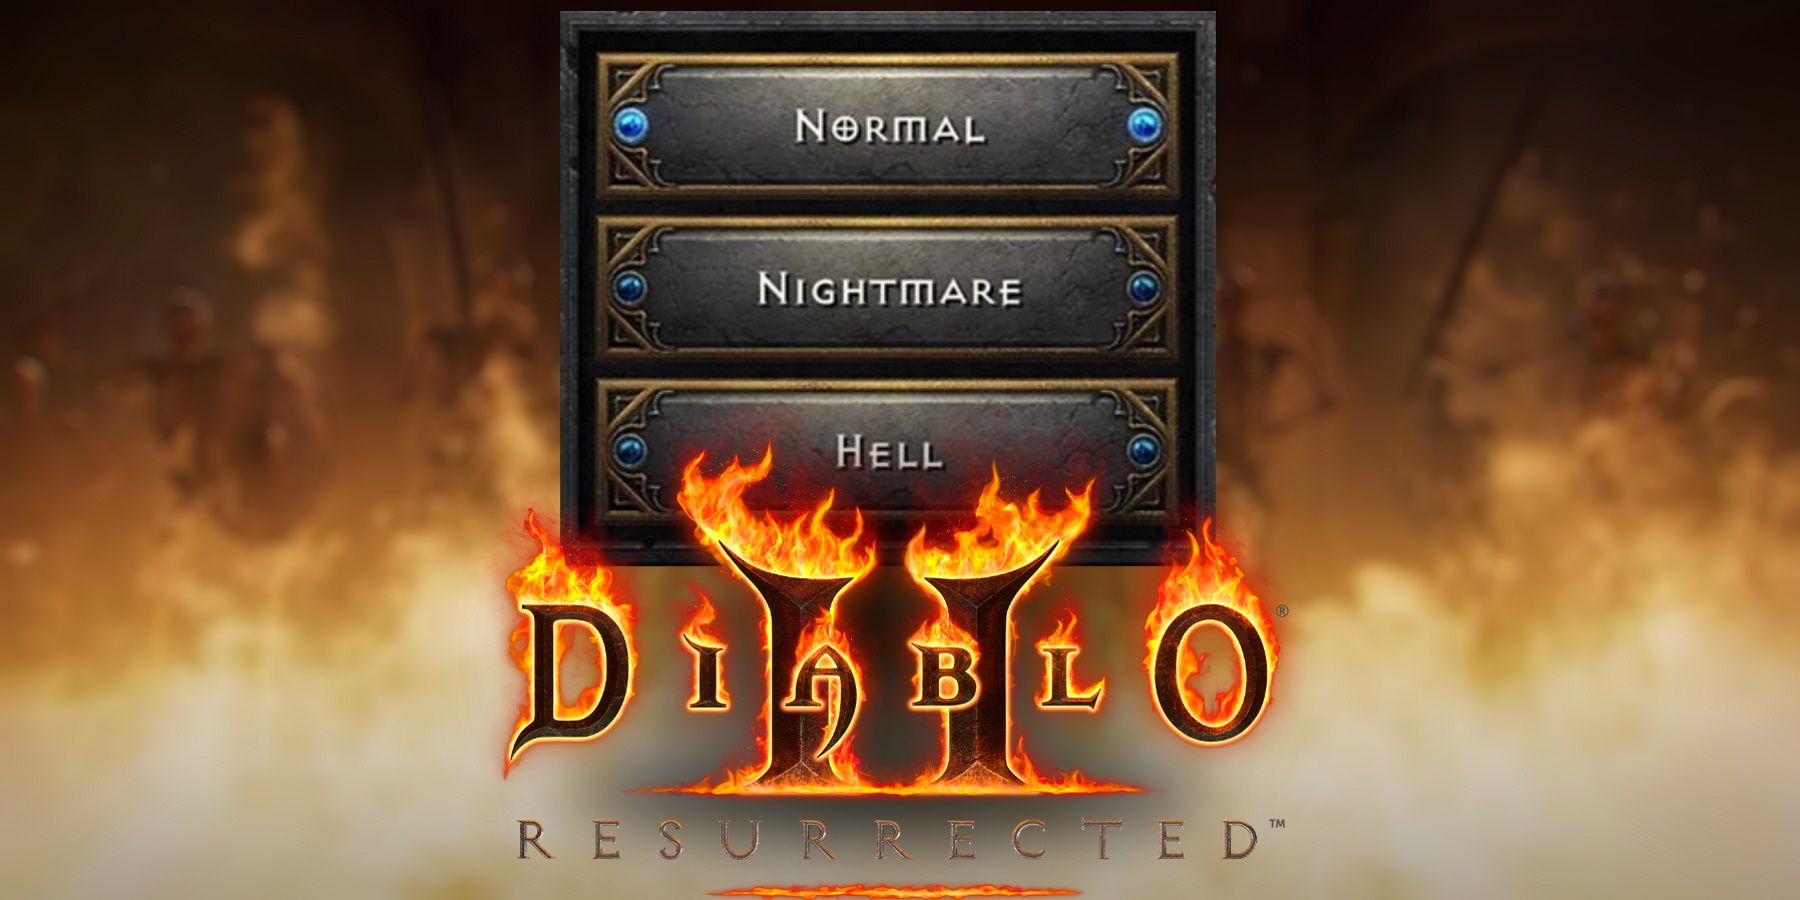 Diablo 2 Resurrected difficulty select screen on act 1 cutscene image and official logo